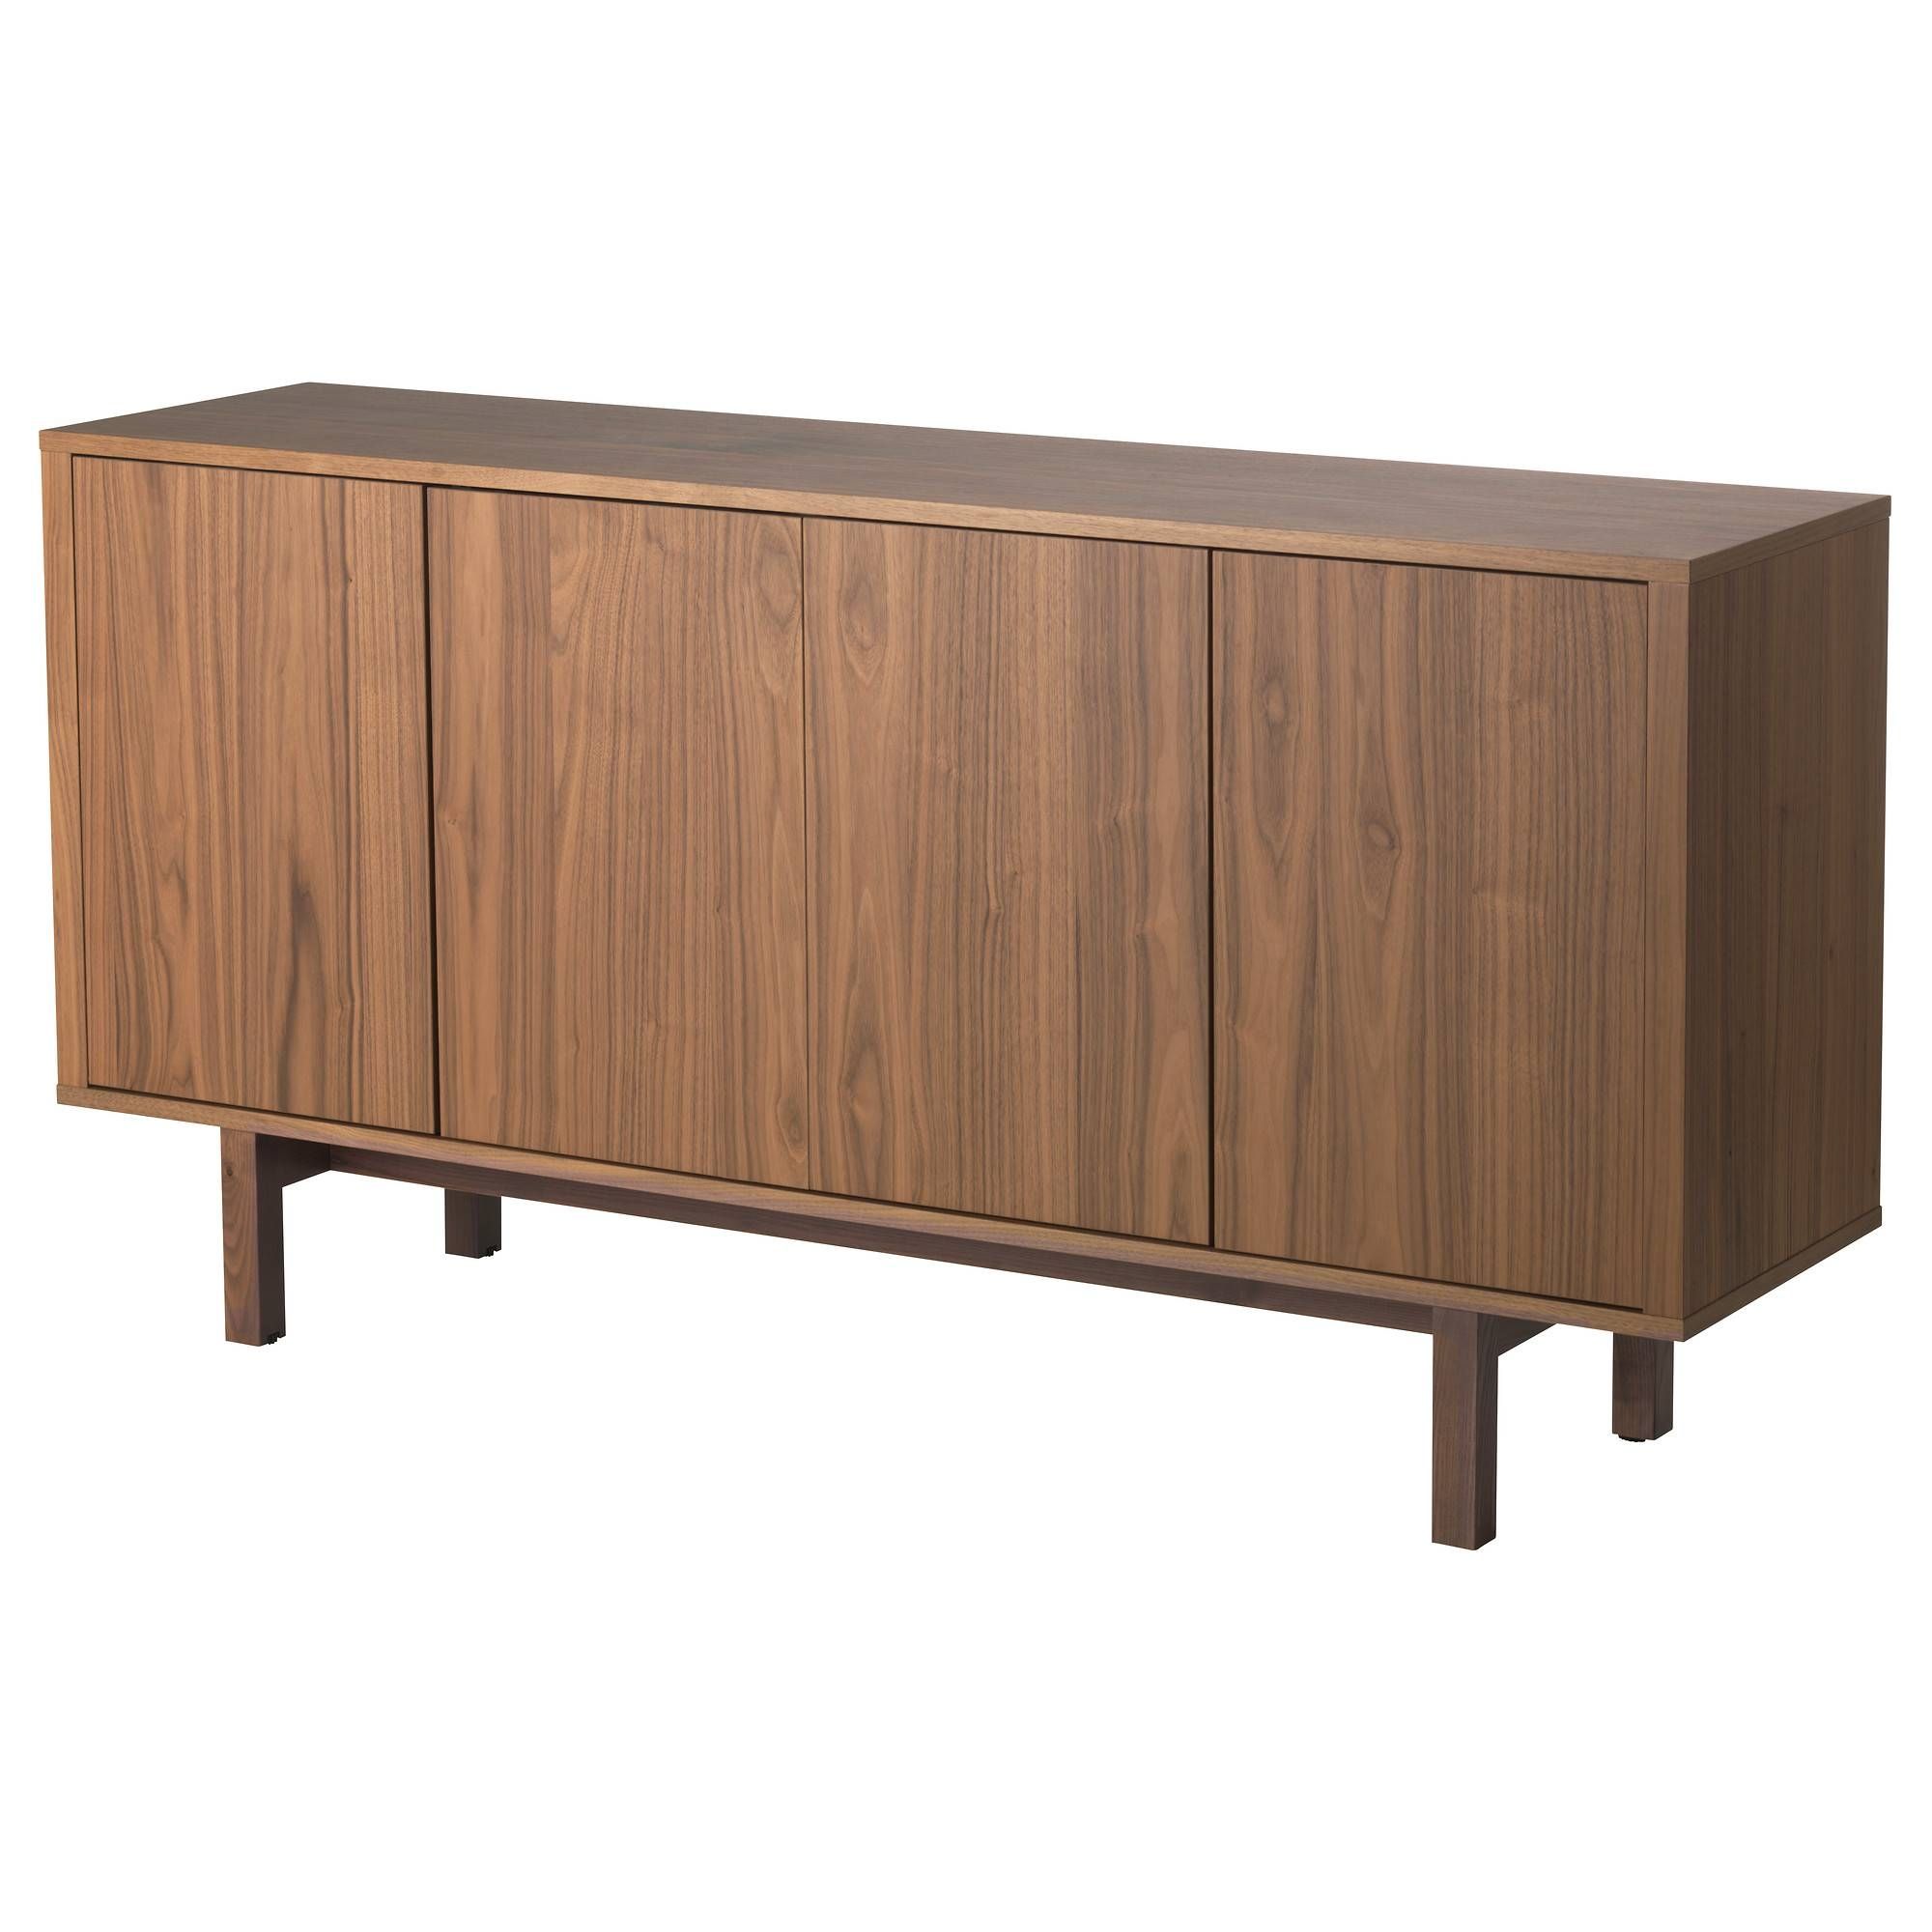 Buffet Tables & Sideboards – Ikea Within Small Sideboards For Sale (View 25 of 30)